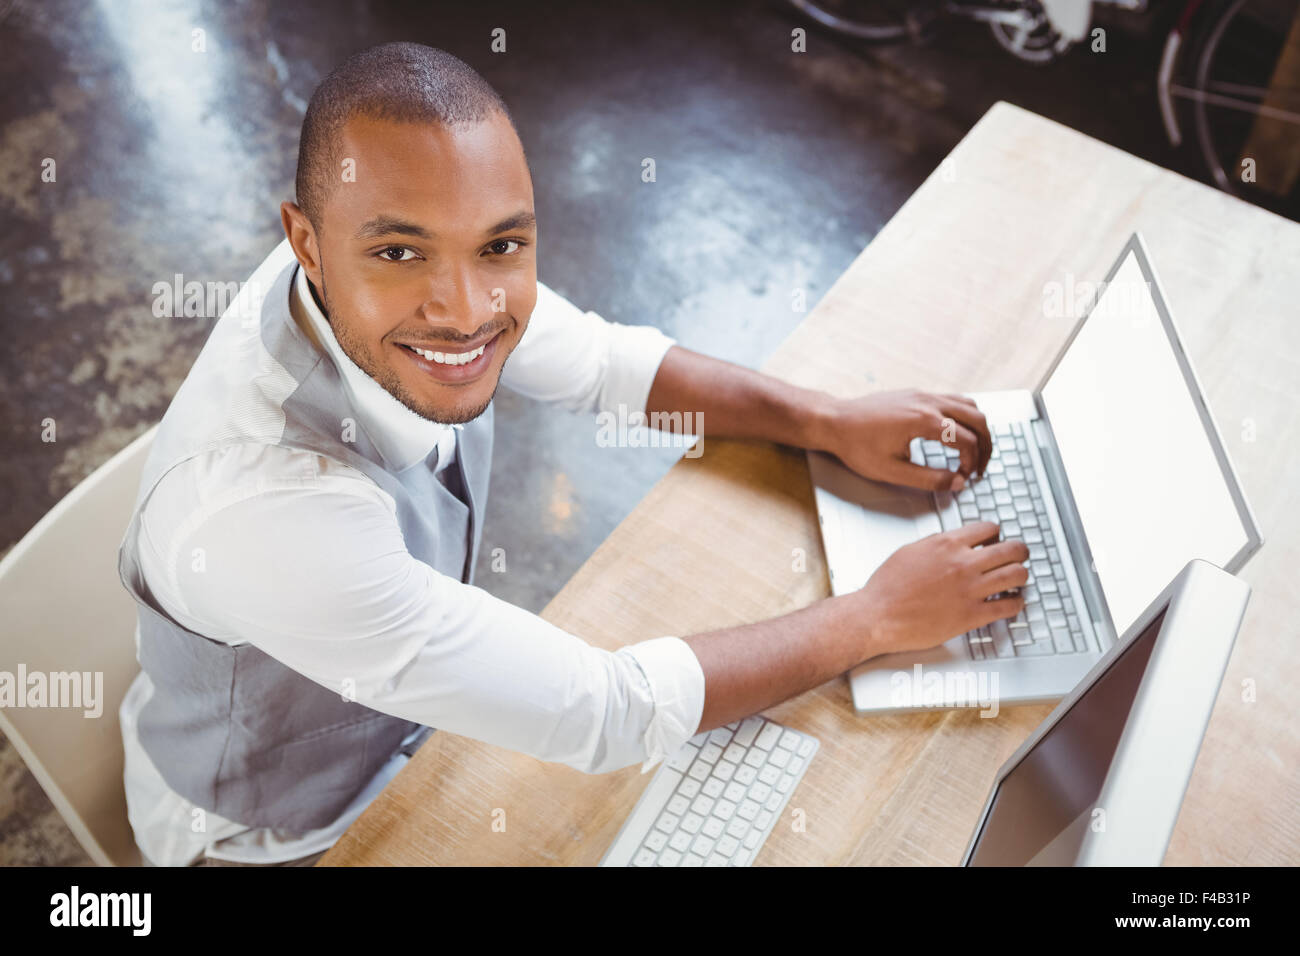 Smiling businessman working at office Stock Photo